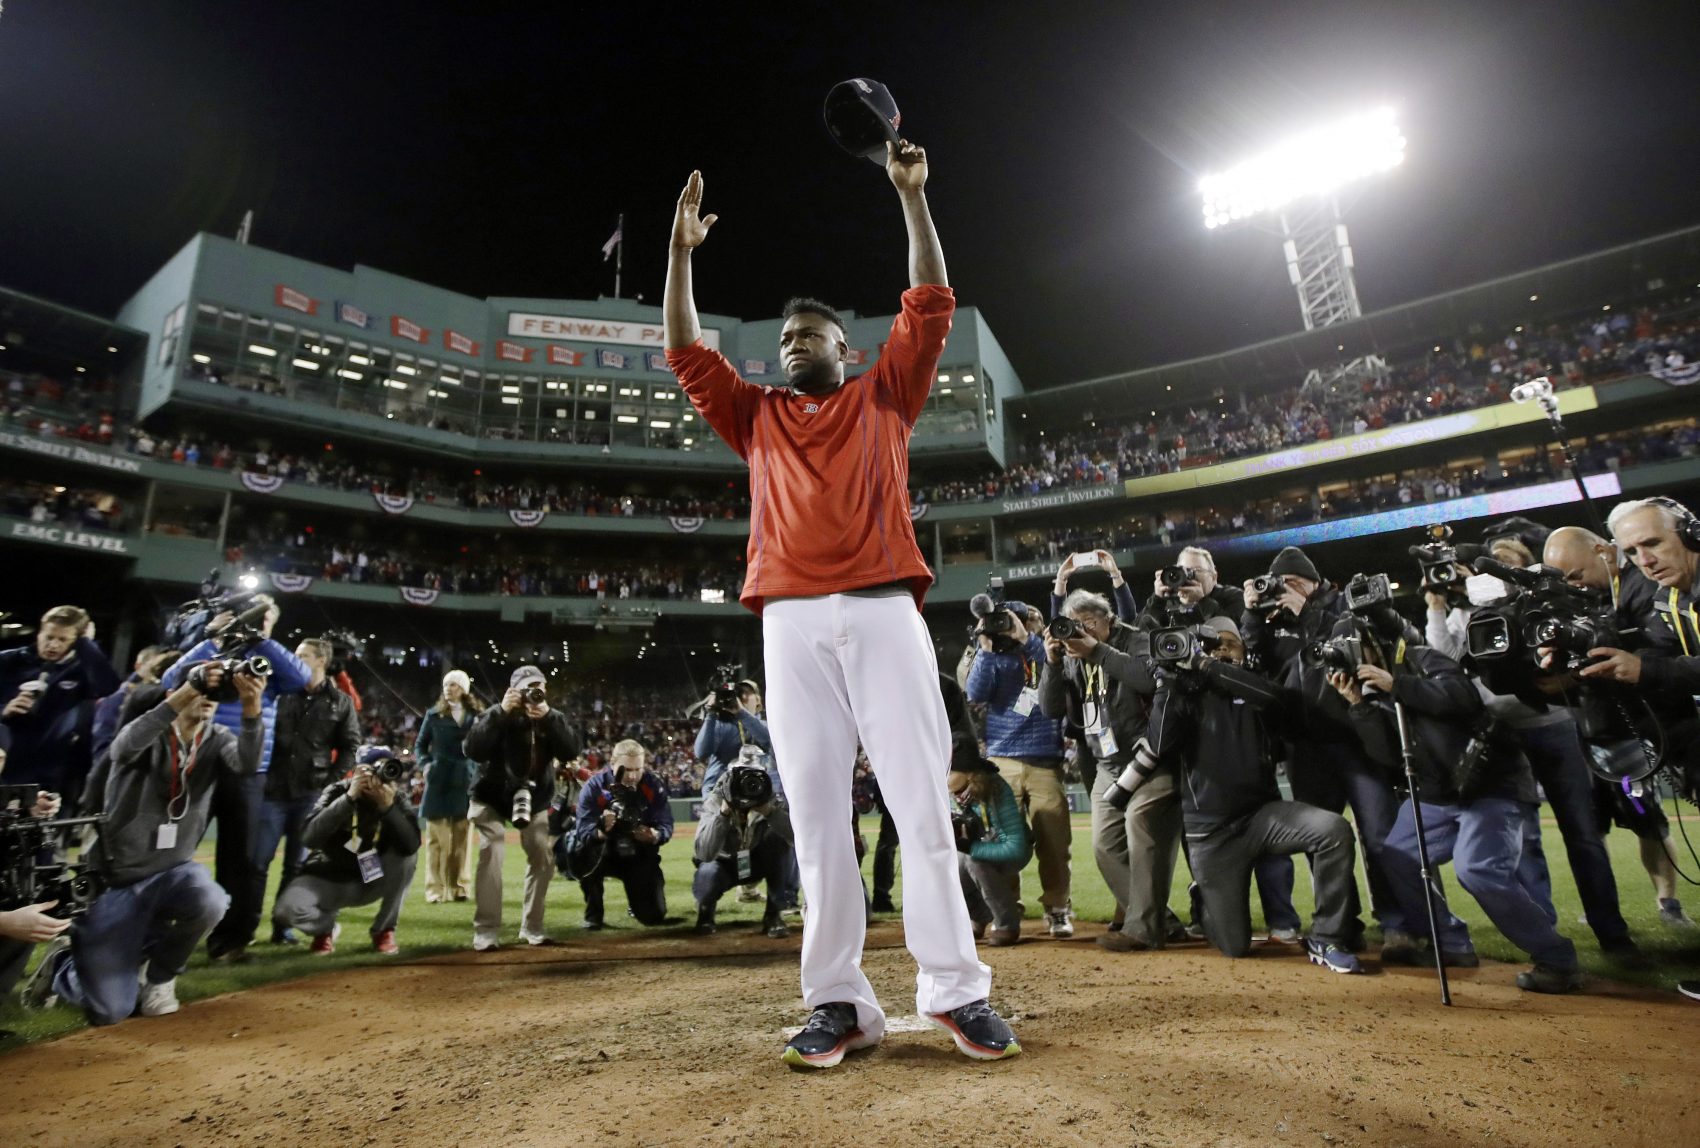 Boston Red Sox's David Ortiz stands on the mound at Fenway Park after Game 3 of baseball's American League Division Series against the Cleveland Indians on Monday in Boston. (Charles Krupa/AP)